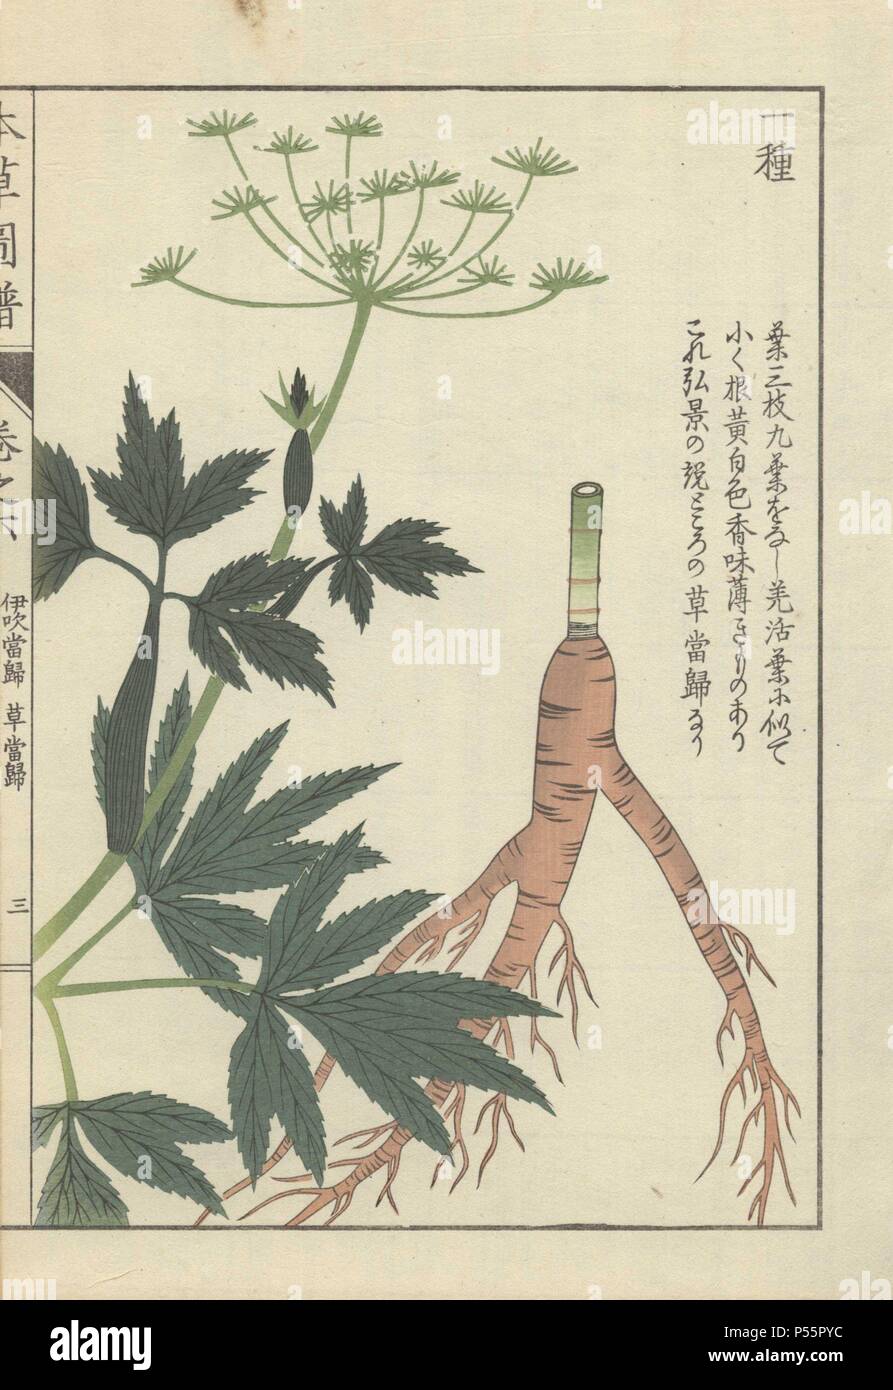 Root, leaves and tiny white florets of Japanese lovage. Ligusticum japonicum. Colour-printed woodblock engraving by Kan'en Iwasaki from 'Honzo Zufu,' an Illustrated Guide to Medicinal Plants, 1884. Iwasaki (1786-1842) was a Japanese botanist, entomologist and zoologist. He was one of the first Japanese botanists to incorporate western knowledge into his studies. Stock Photo